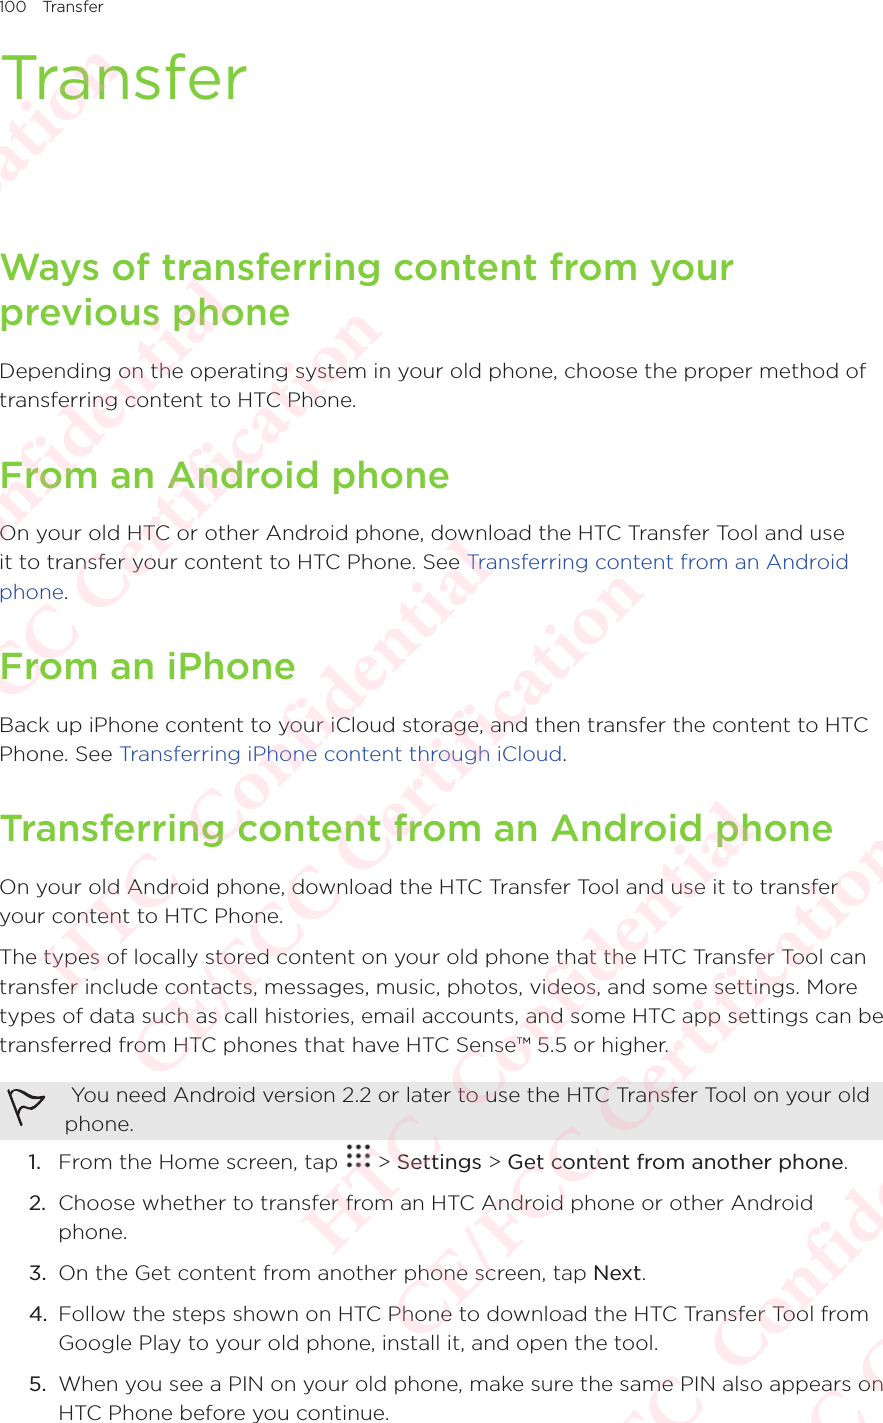 100 TransferTransferWays of transferring content from your previous phoneDepending on the operating system in your old phone, choose the proper method of transferring content to HTC Phone. From an Android phoneOn your old HTC or other Android phone, download the HTC Transfer Tool and use it to transfer your content to HTC Phone. See Transferring content from an Android phone.From an iPhoneBack up iPhone content to your iCloud storage, and then transfer the content to HTC Phone. See Transferring iPhone content through iCloud. Transferring content from an Android phoneOn your old Android phone, download the HTC Transfer Tool and use it to transfer your content to HTC Phone. The types of locally stored content on your old phone that the HTC Transfer Tool can transfer include contacts, messages, music, photos, videos, and some settings. More types of data such as call histories, email accounts, and some HTC app settings can be transferred from HTC phones that have HTC Sense™ 5.5 or higher.  You need Android version 2.2 or later to use the HTC Transfer Tool on your old phone. 1.  From the Home screen, tap   &gt; Settings &gt; Get content from another phone. 2.  Choose whether to transfer from an HTC Android phone or other Android phone. 3.  On the Get content from another phone screen, tap Next. 4.  Follow the steps shown on HTC Phone to download the HTC Transfer Tool from Google Play to your old phone, install it, and open the tool. 5.  When you see a PIN on your old phone, make sure the same PIN also appears on HTC Phone before you continue. HTC  Confidential CE/FCC Certification  HTC  Confidential CE/FCC Certification  HTC  Confidential CE/FCC Certification  HTC  Confidential CE/FCC Certification  HTC  Confidential CE/FCC Certification 